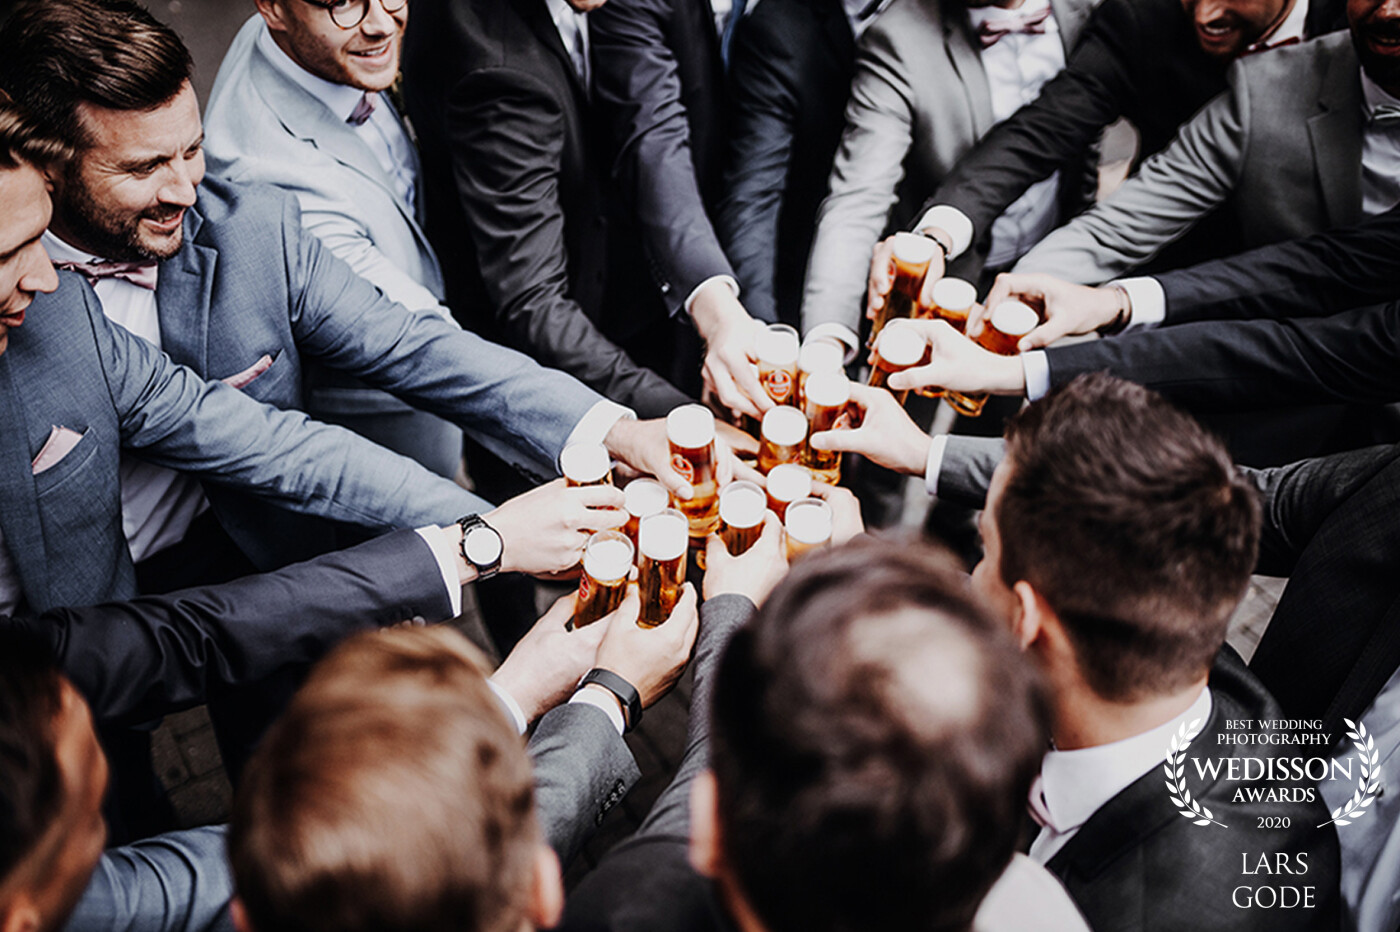 It was the first time after the corona-lockdown that a wedding couple could join a party with 50 people. Especially in Cologne, it was time to toast with a beer called "Kölsch". 